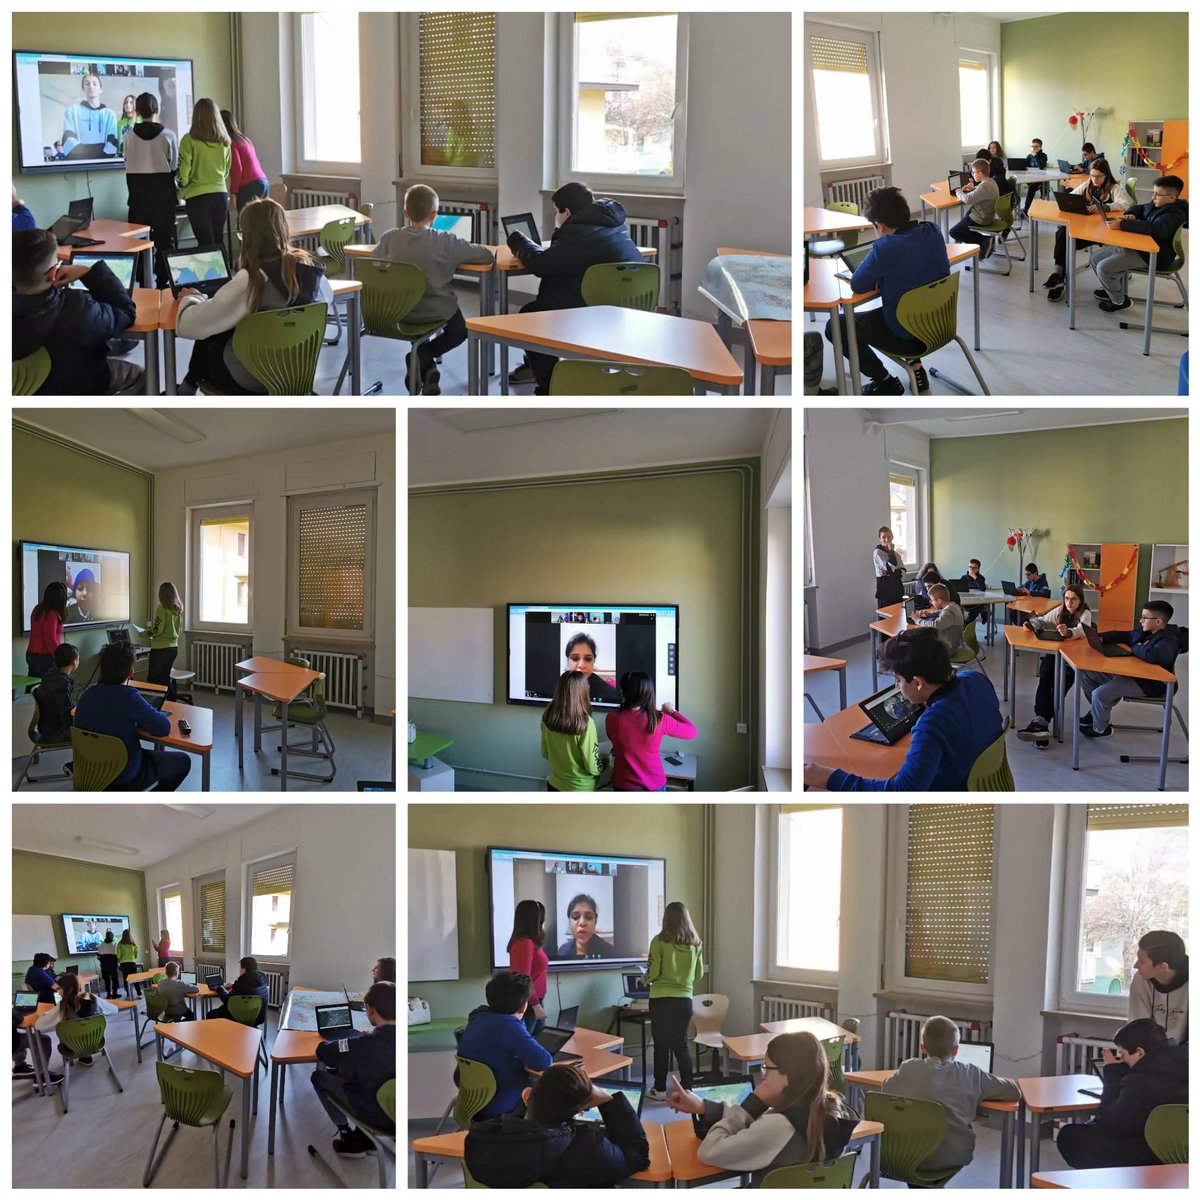 Great #mysteryskype yesterday with #newdelhi #secondariatravo
We showed a presentation on Italy. They said they knew Venice & Rome as they are usual film settings
We will keep in touch!!
In a 2nd meeting they will show us a typical Indian dance
#innovation
#English
#technologies